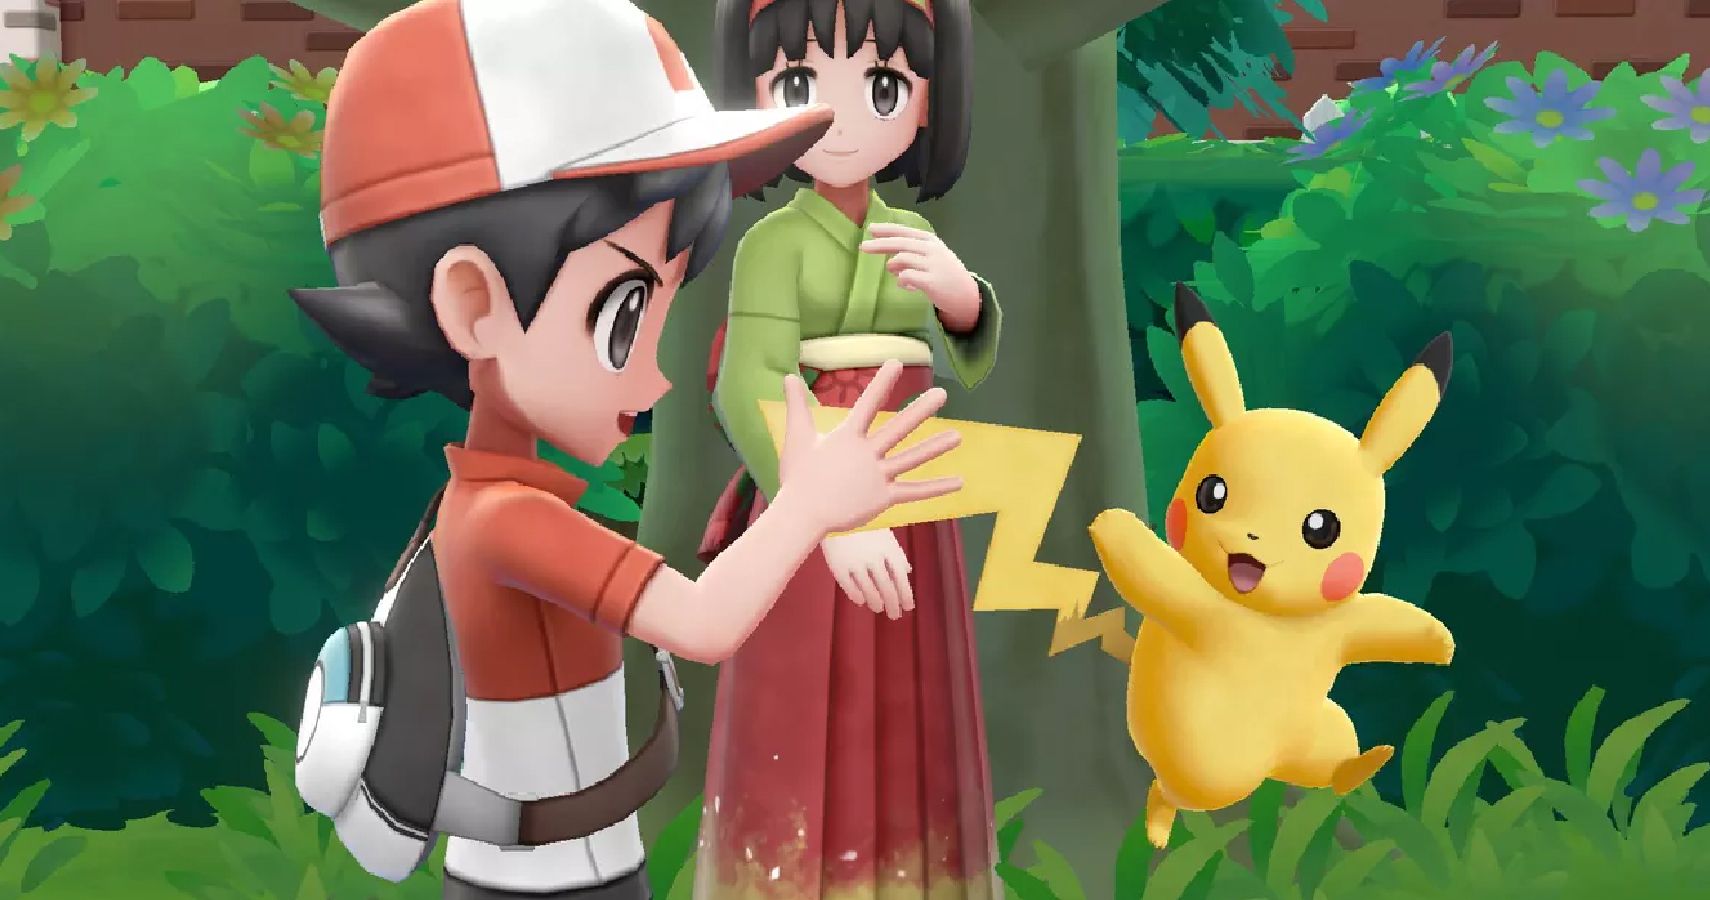 Pokémon Let's Go! Pikachu and Eevee Versions launch on Switch in November -  Polygon